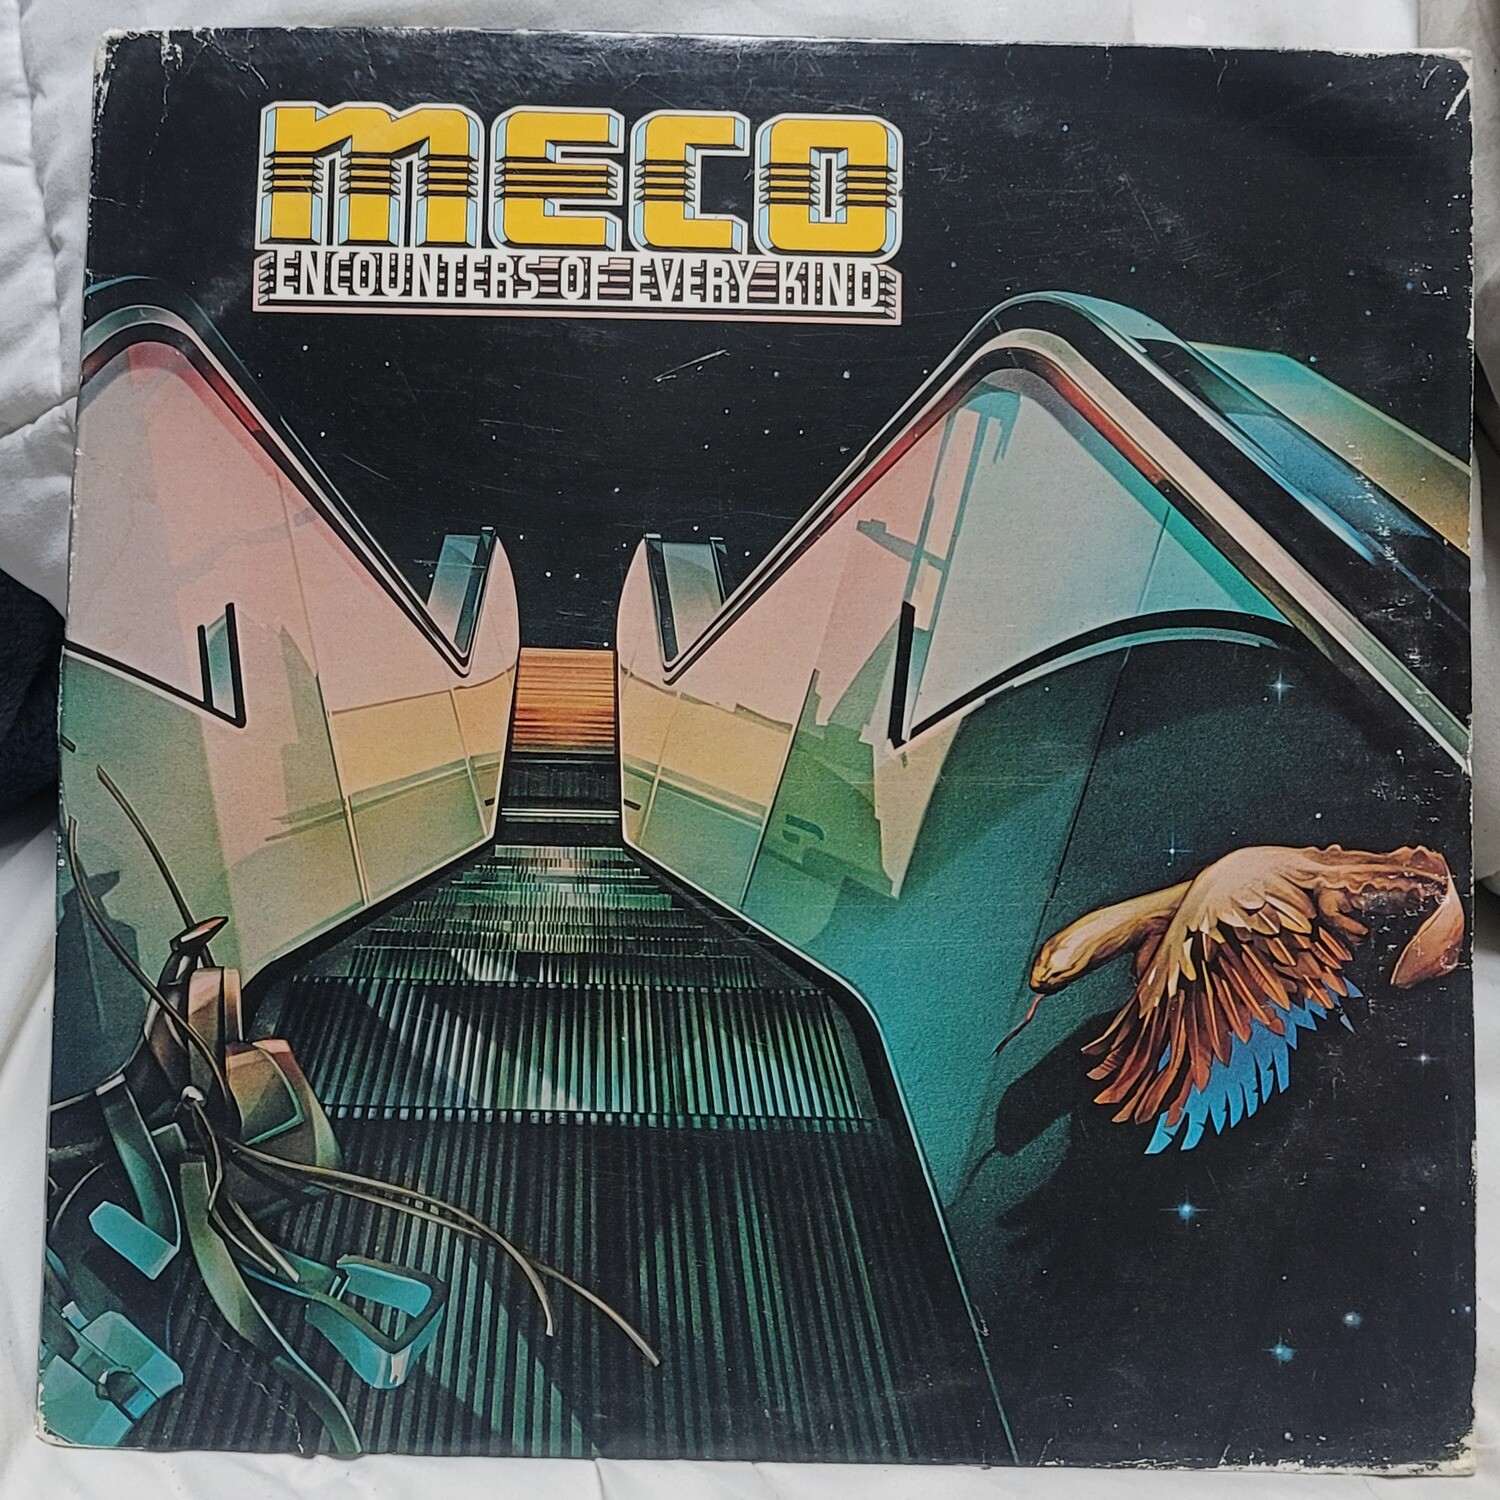 Meco Encounters of Every Kind Vinyl Record [1978]